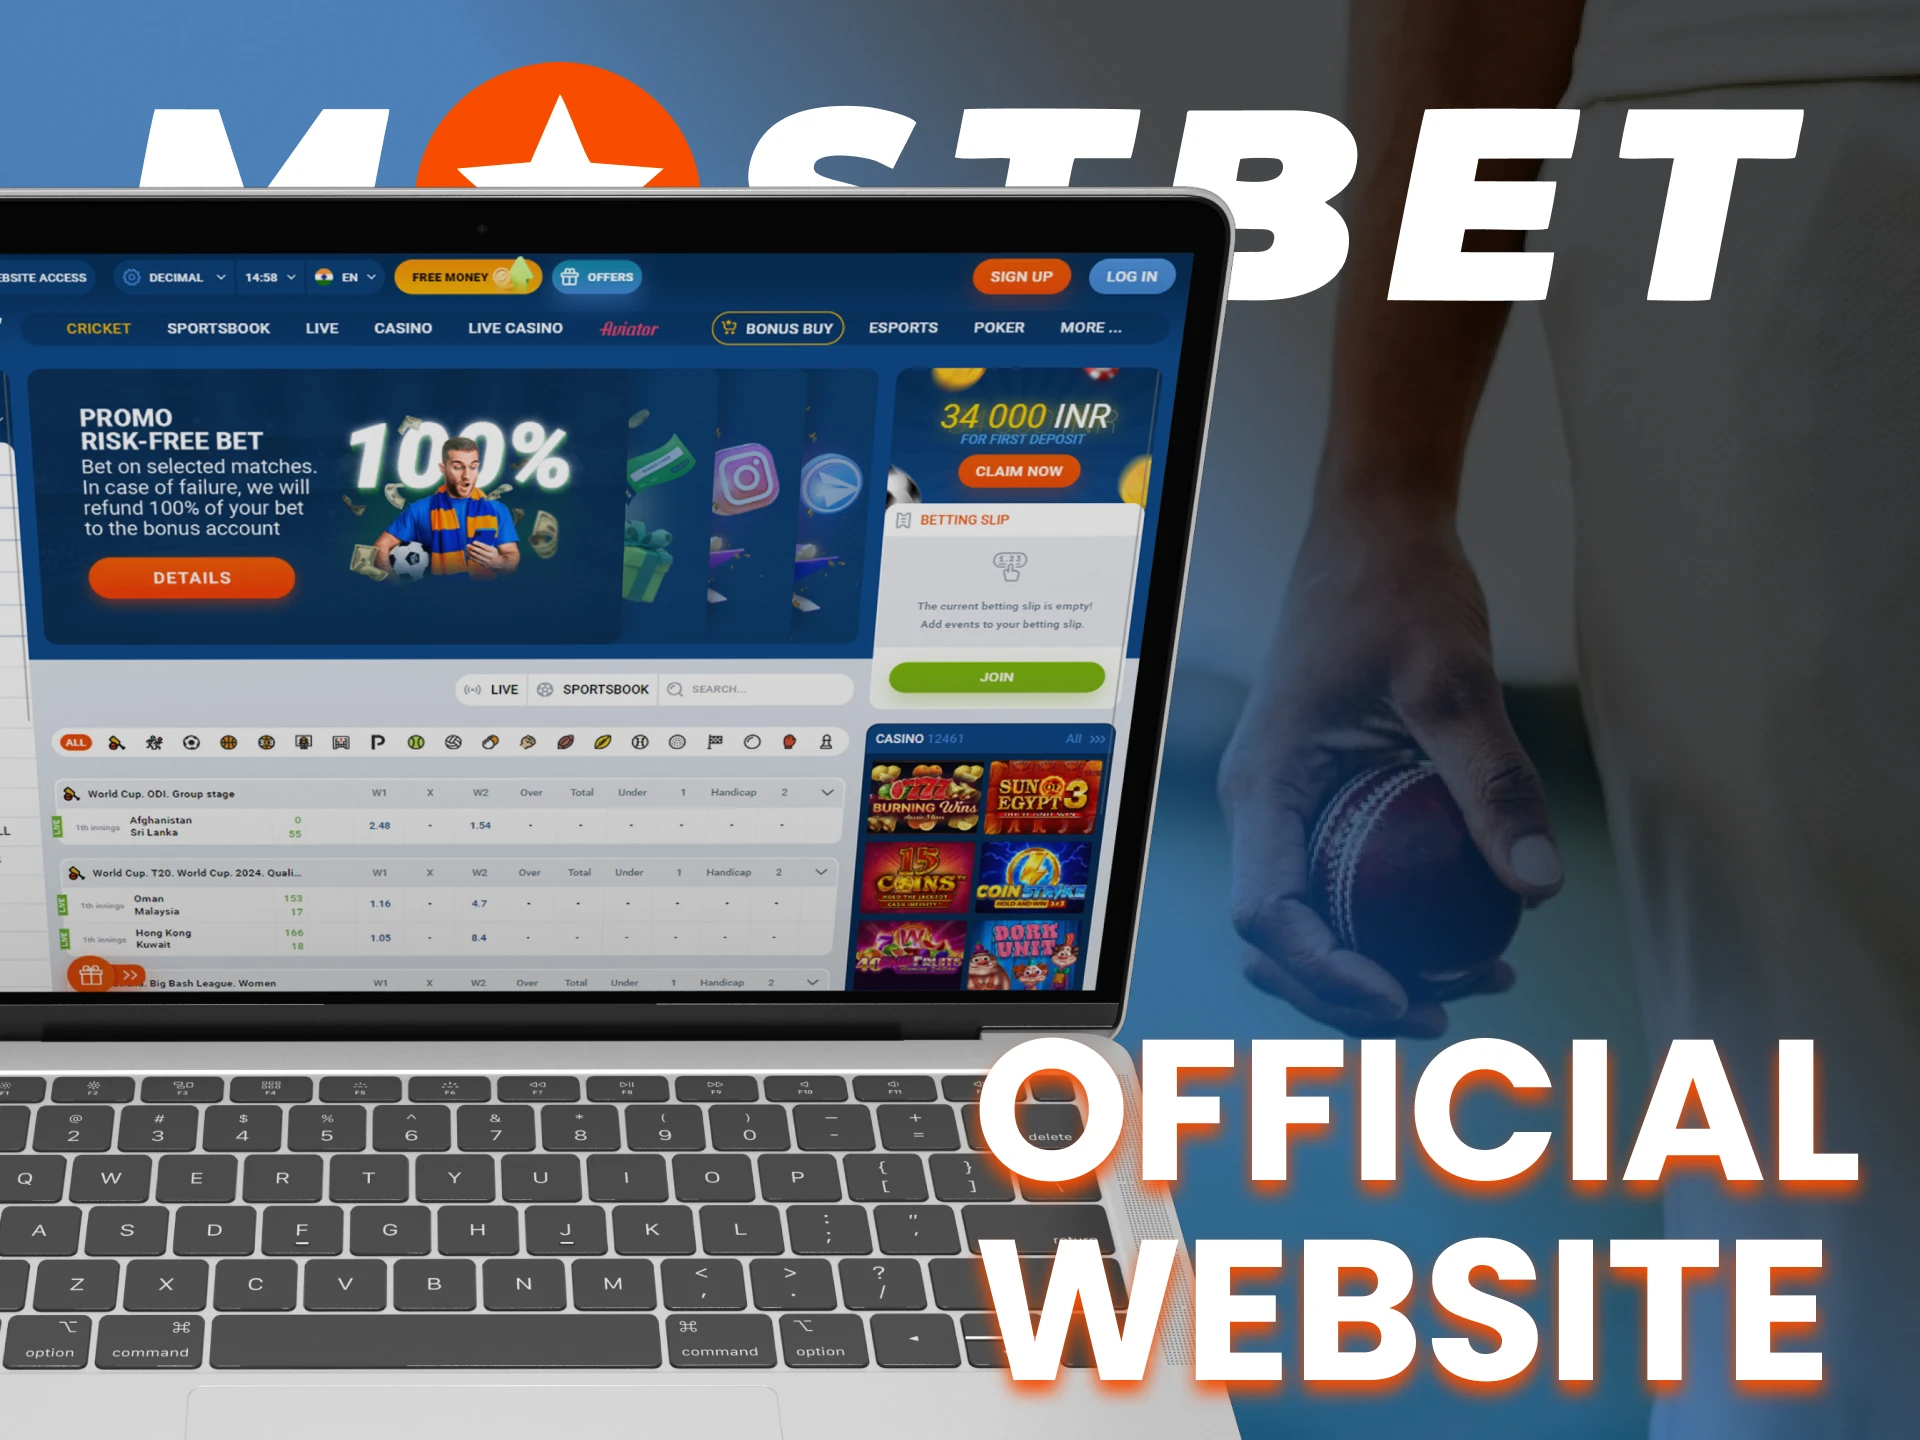 Mostbet has a handy official website where you can bet.